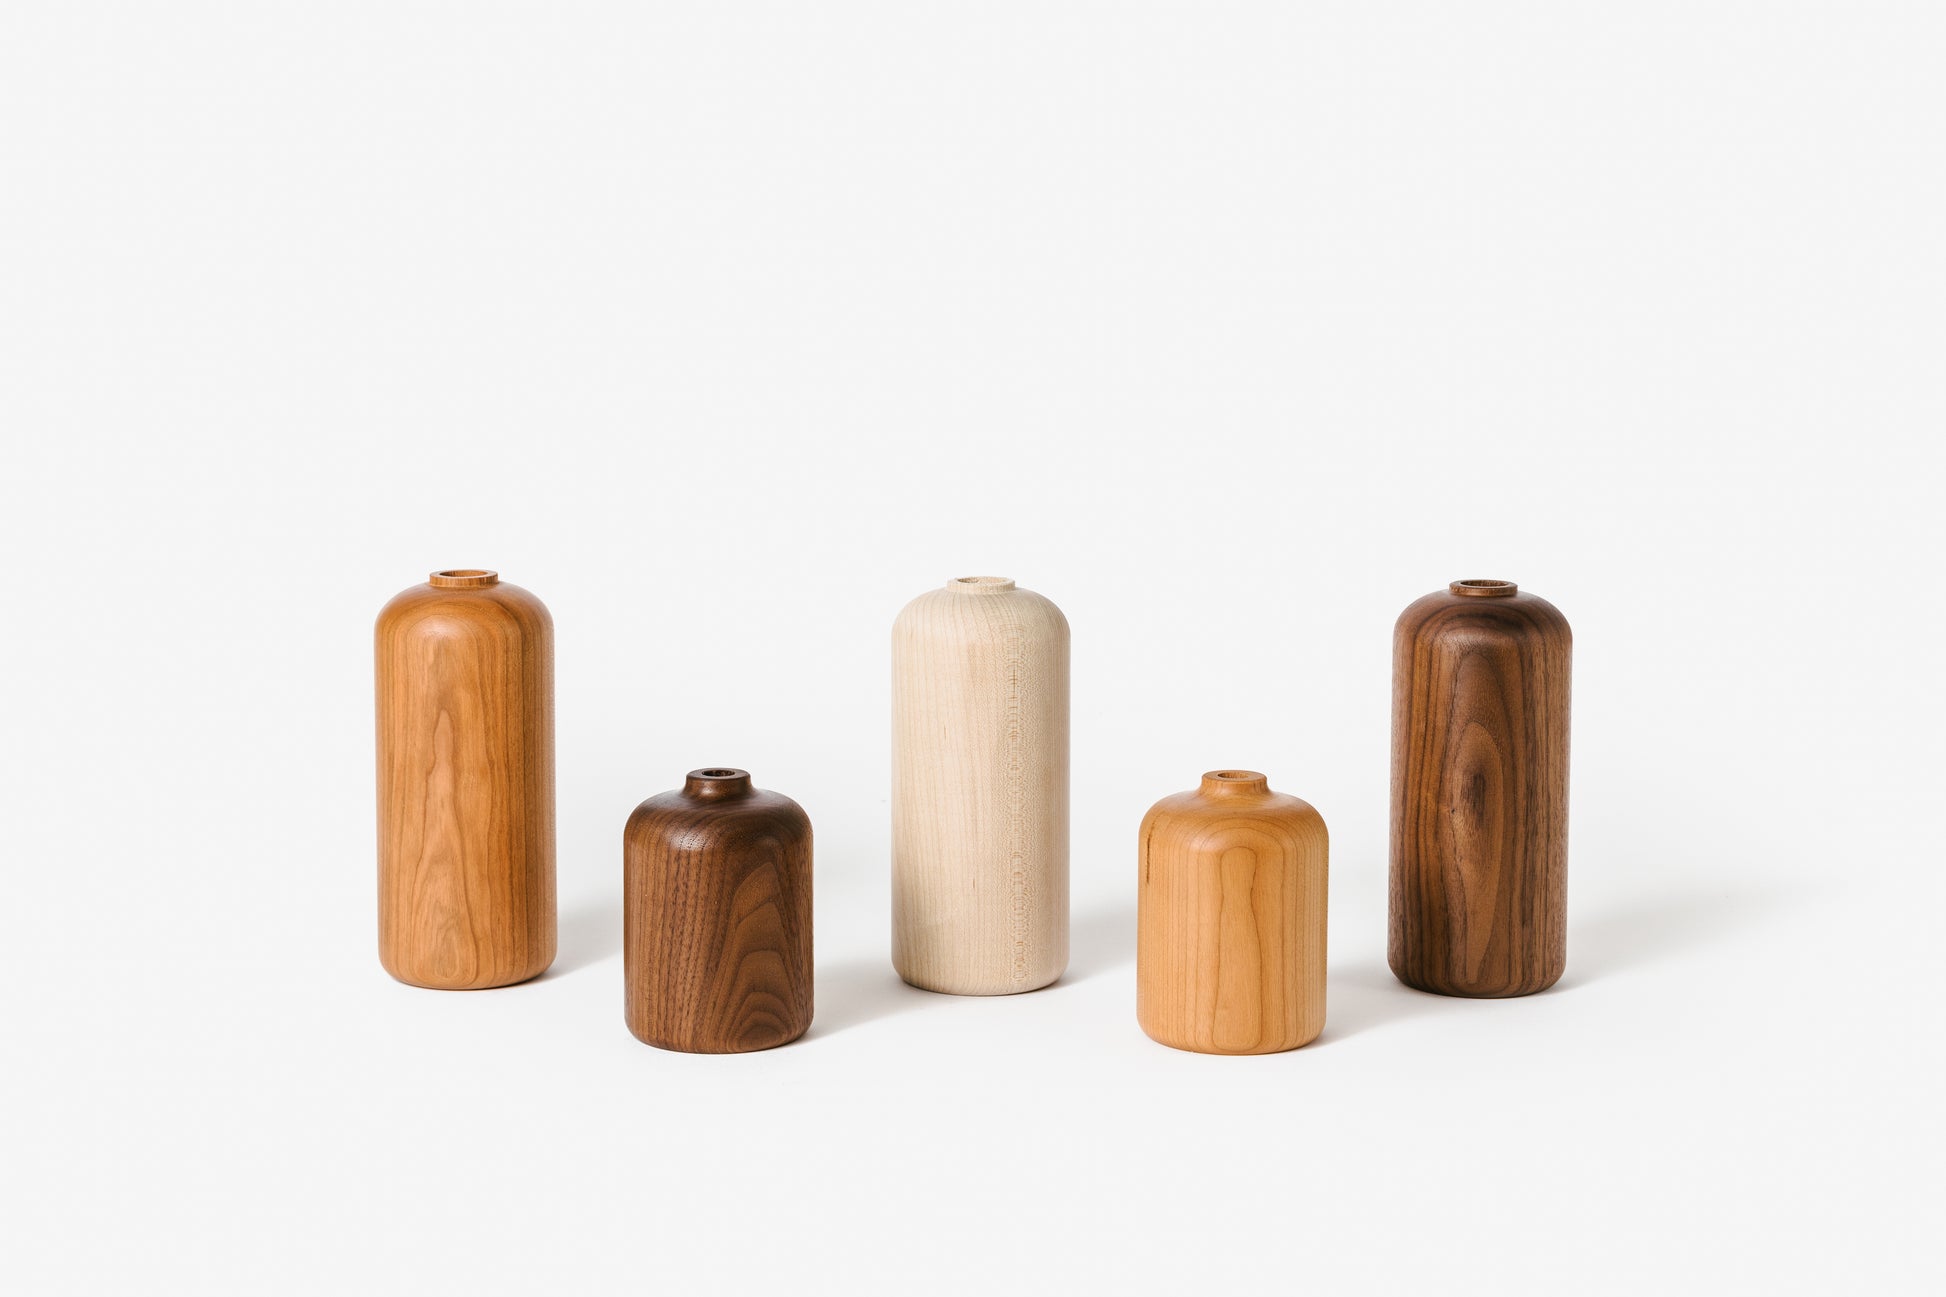 Collection of bud vases in varying styles and woods | Melanie Abrantes Designs